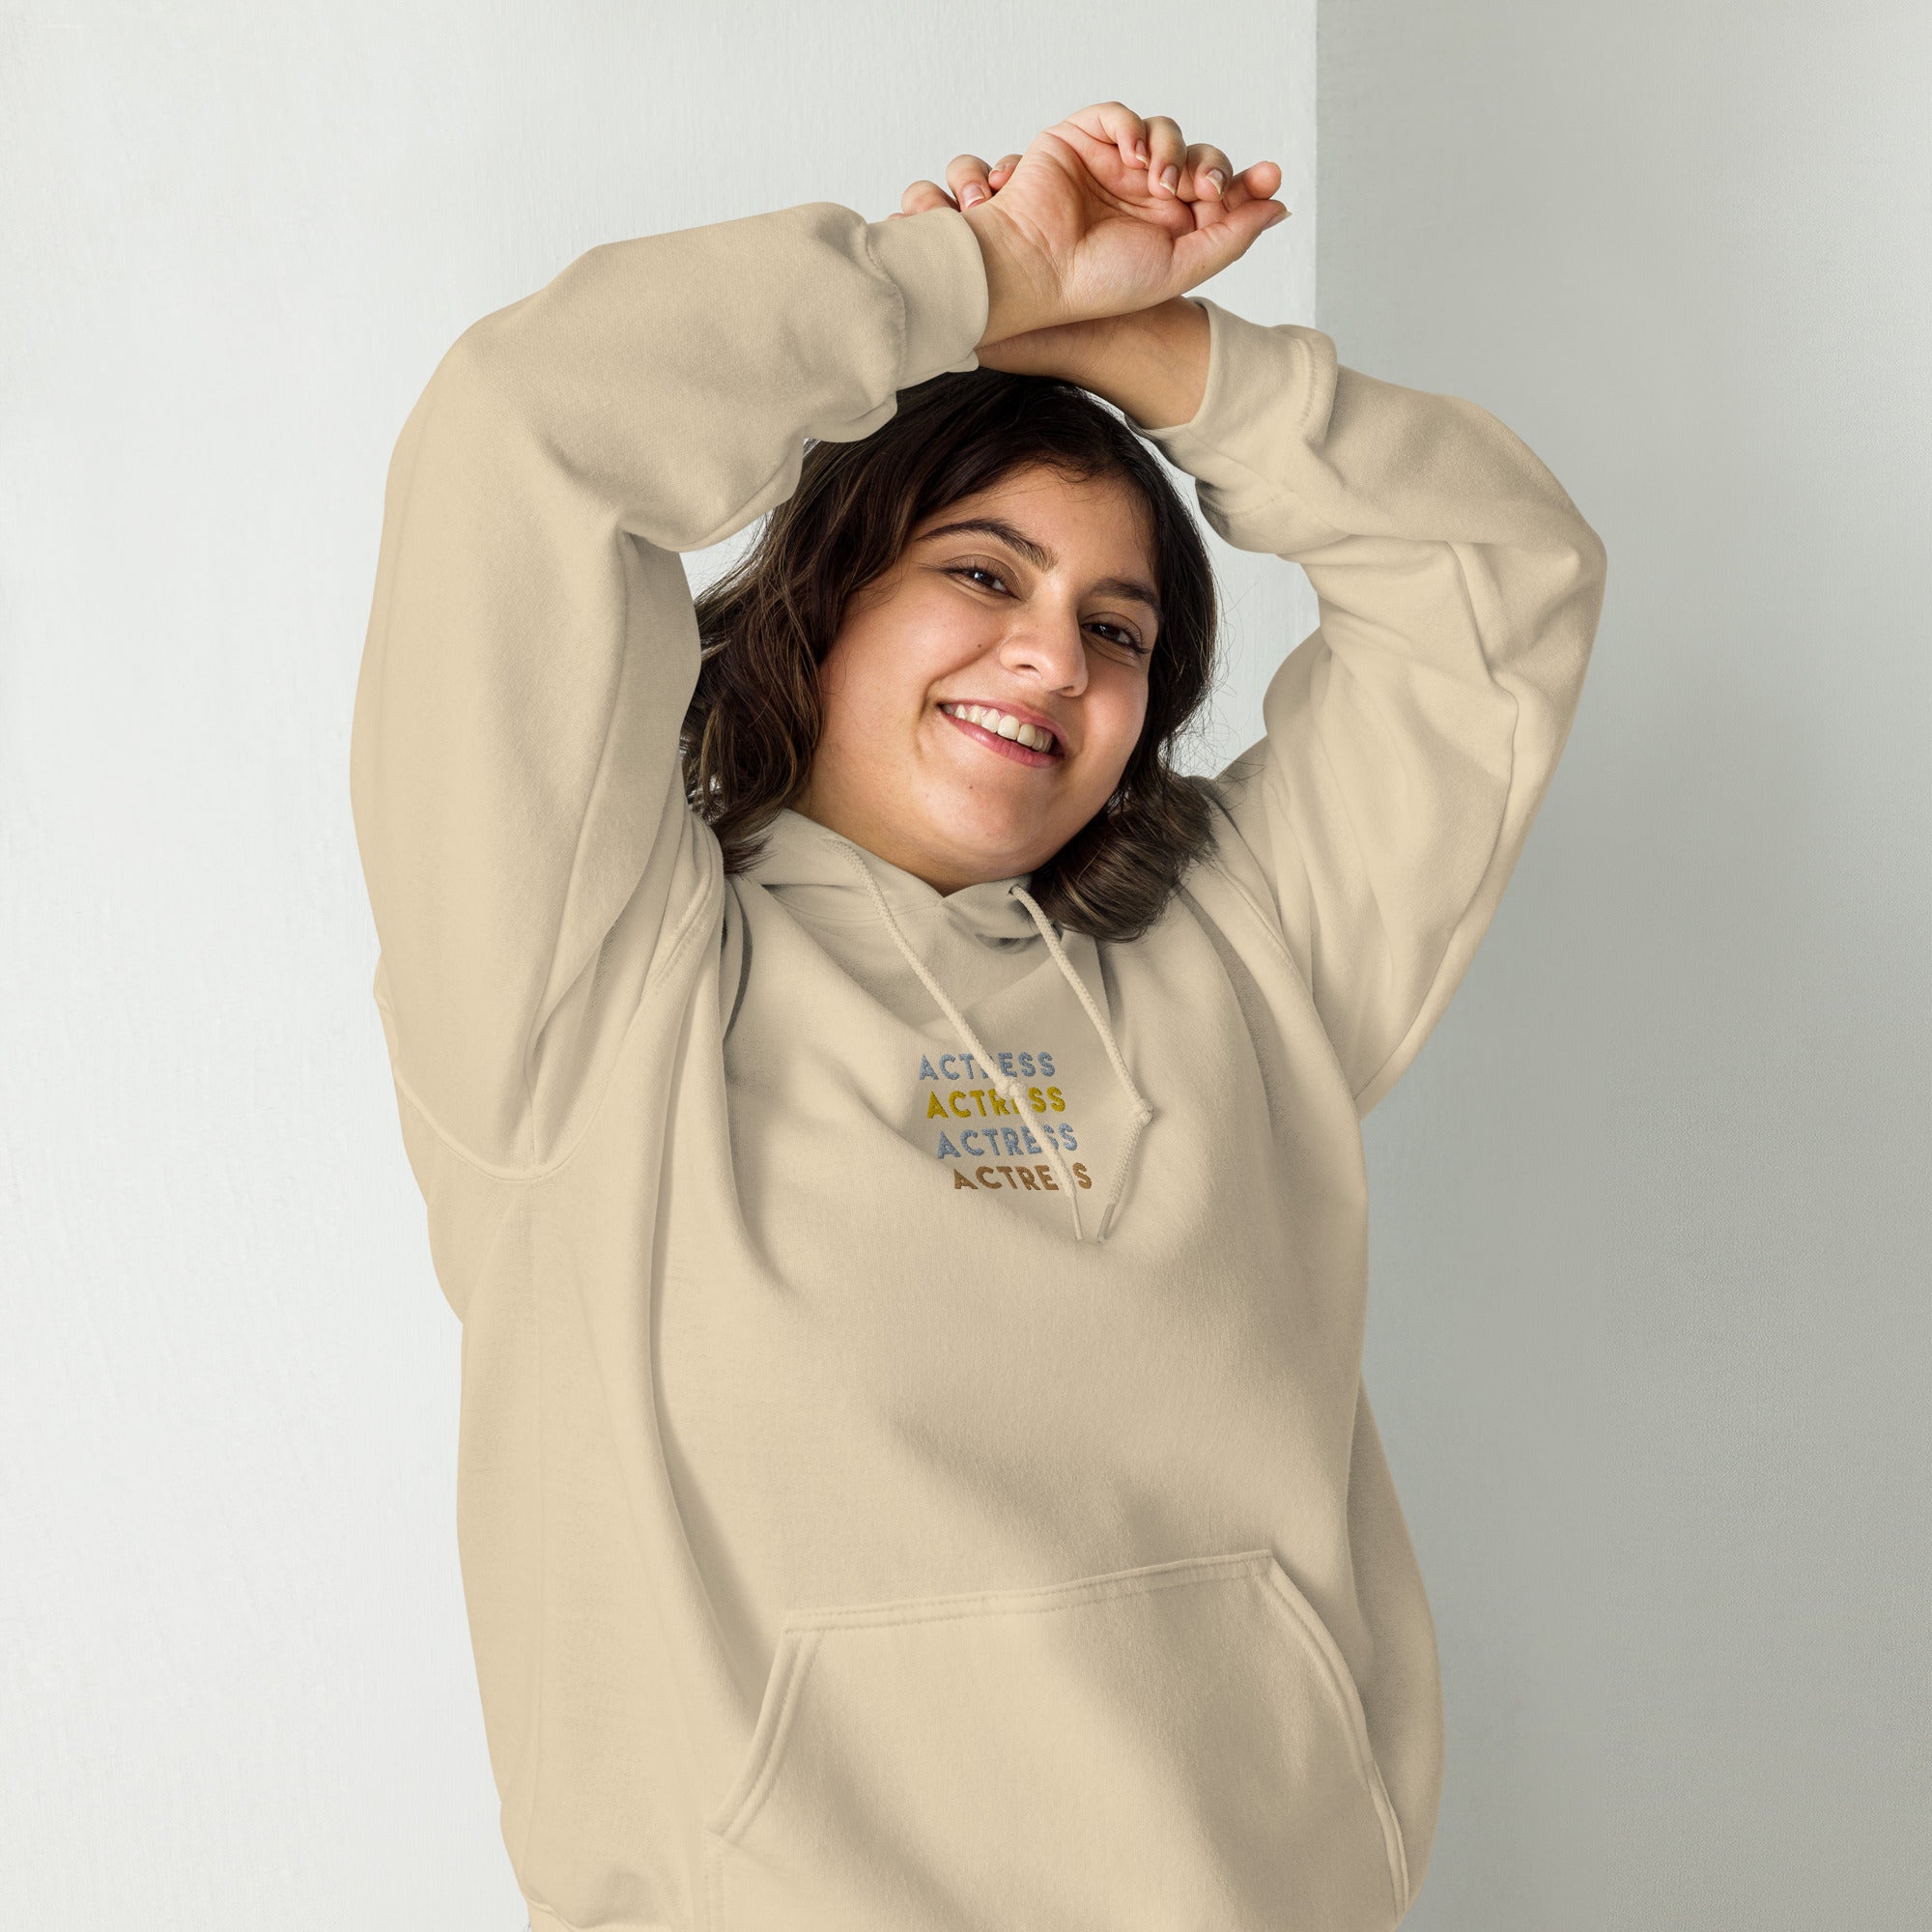 Actress Embroidered Gold Unisex Hoodie in Sand Color Happy Lady| Gift for Actresses Actors